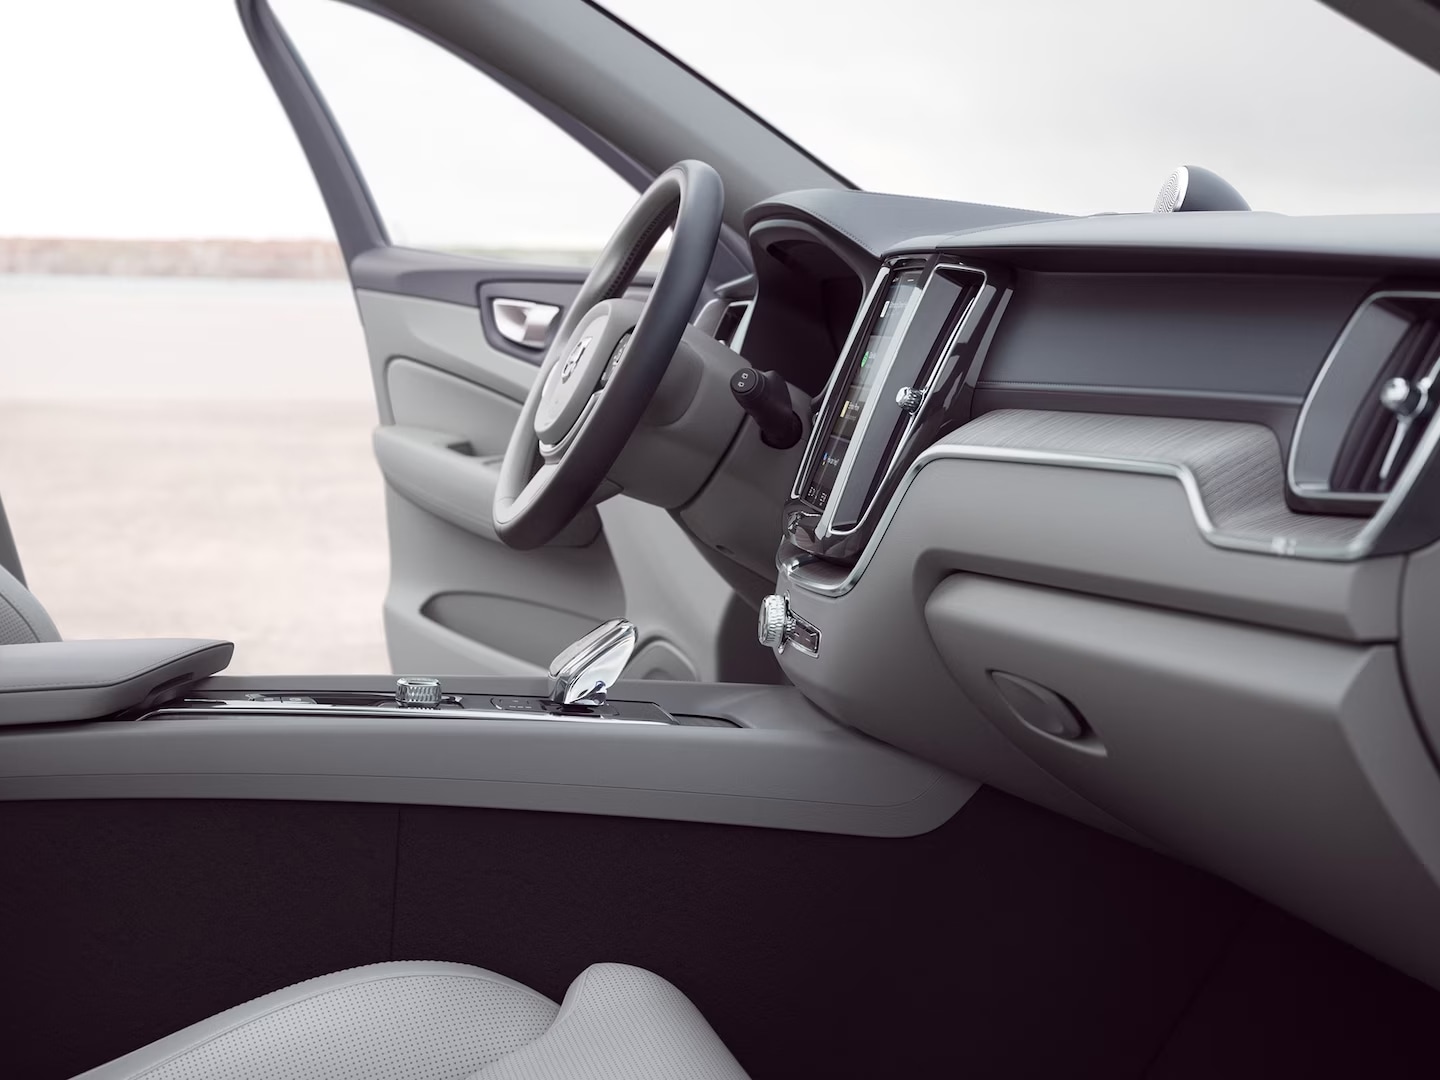 An interior view of a Volvo XC60 SUV.